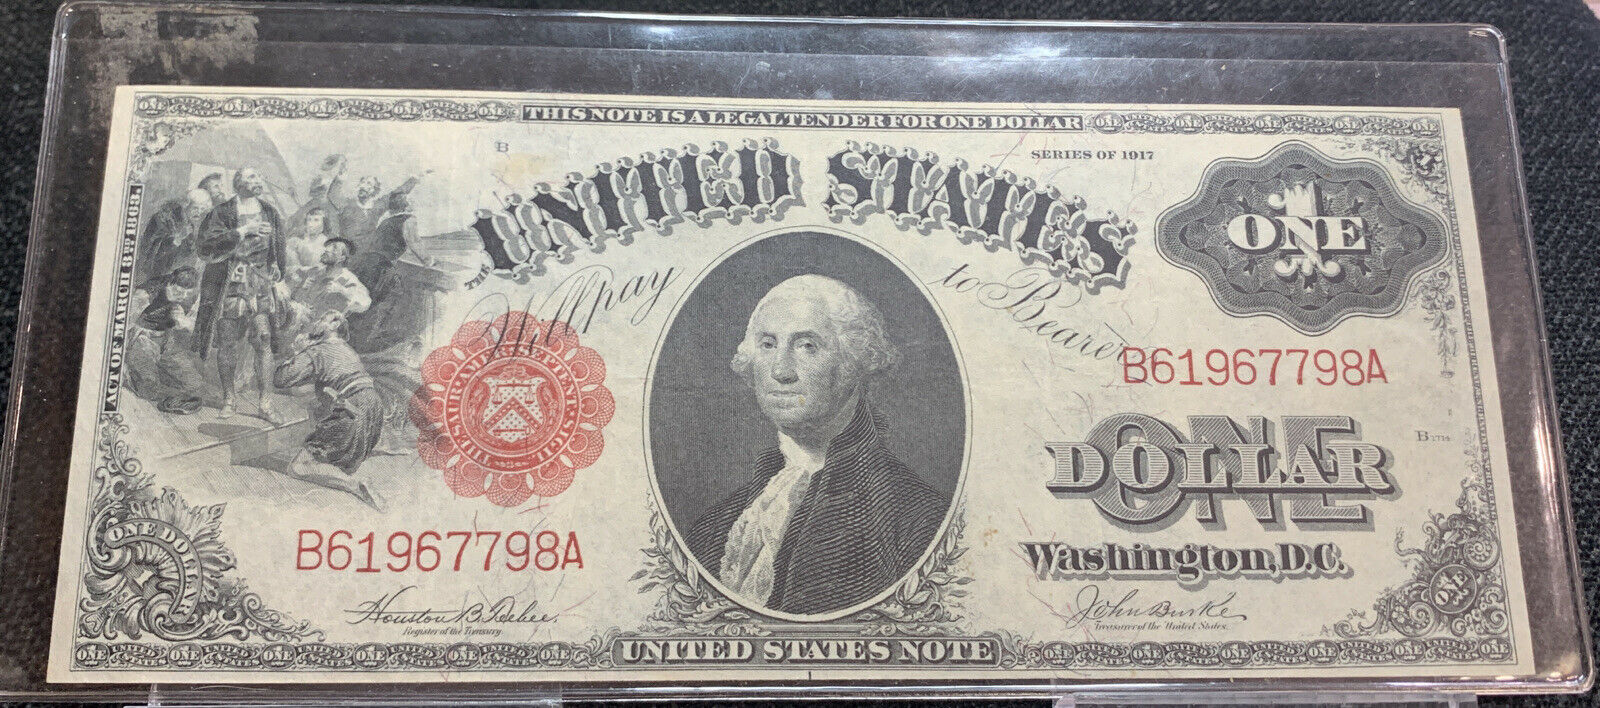 one dollar star note lookup